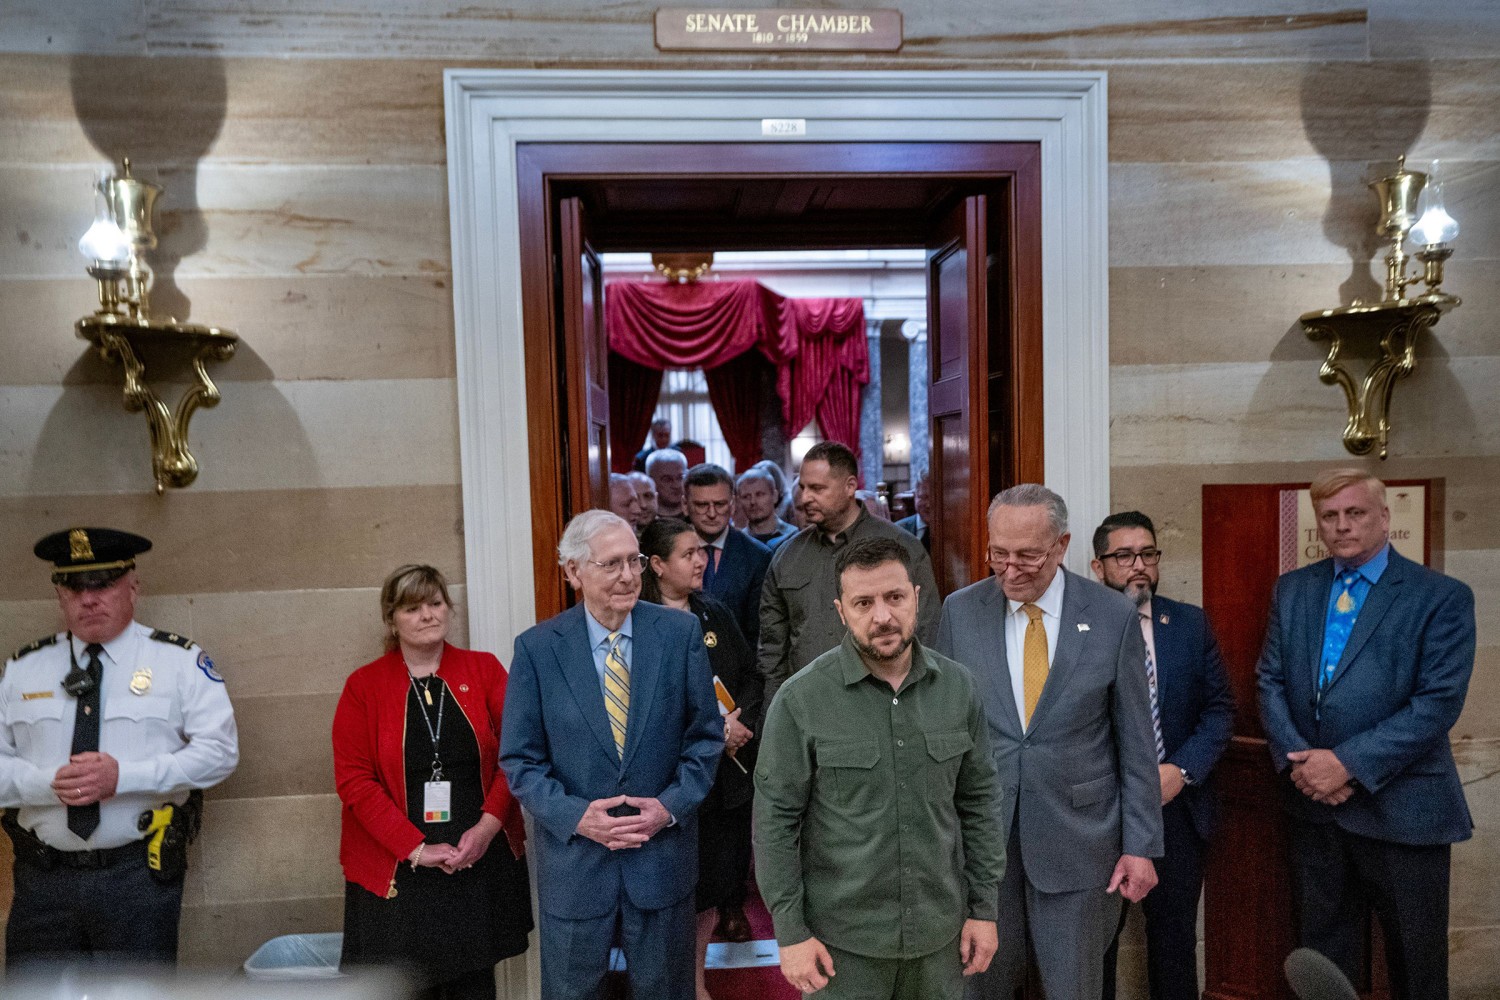 Zelensky leaves a contentious meeting with U.S. Senators in the Capitol on Sept. 21.Shutterstock